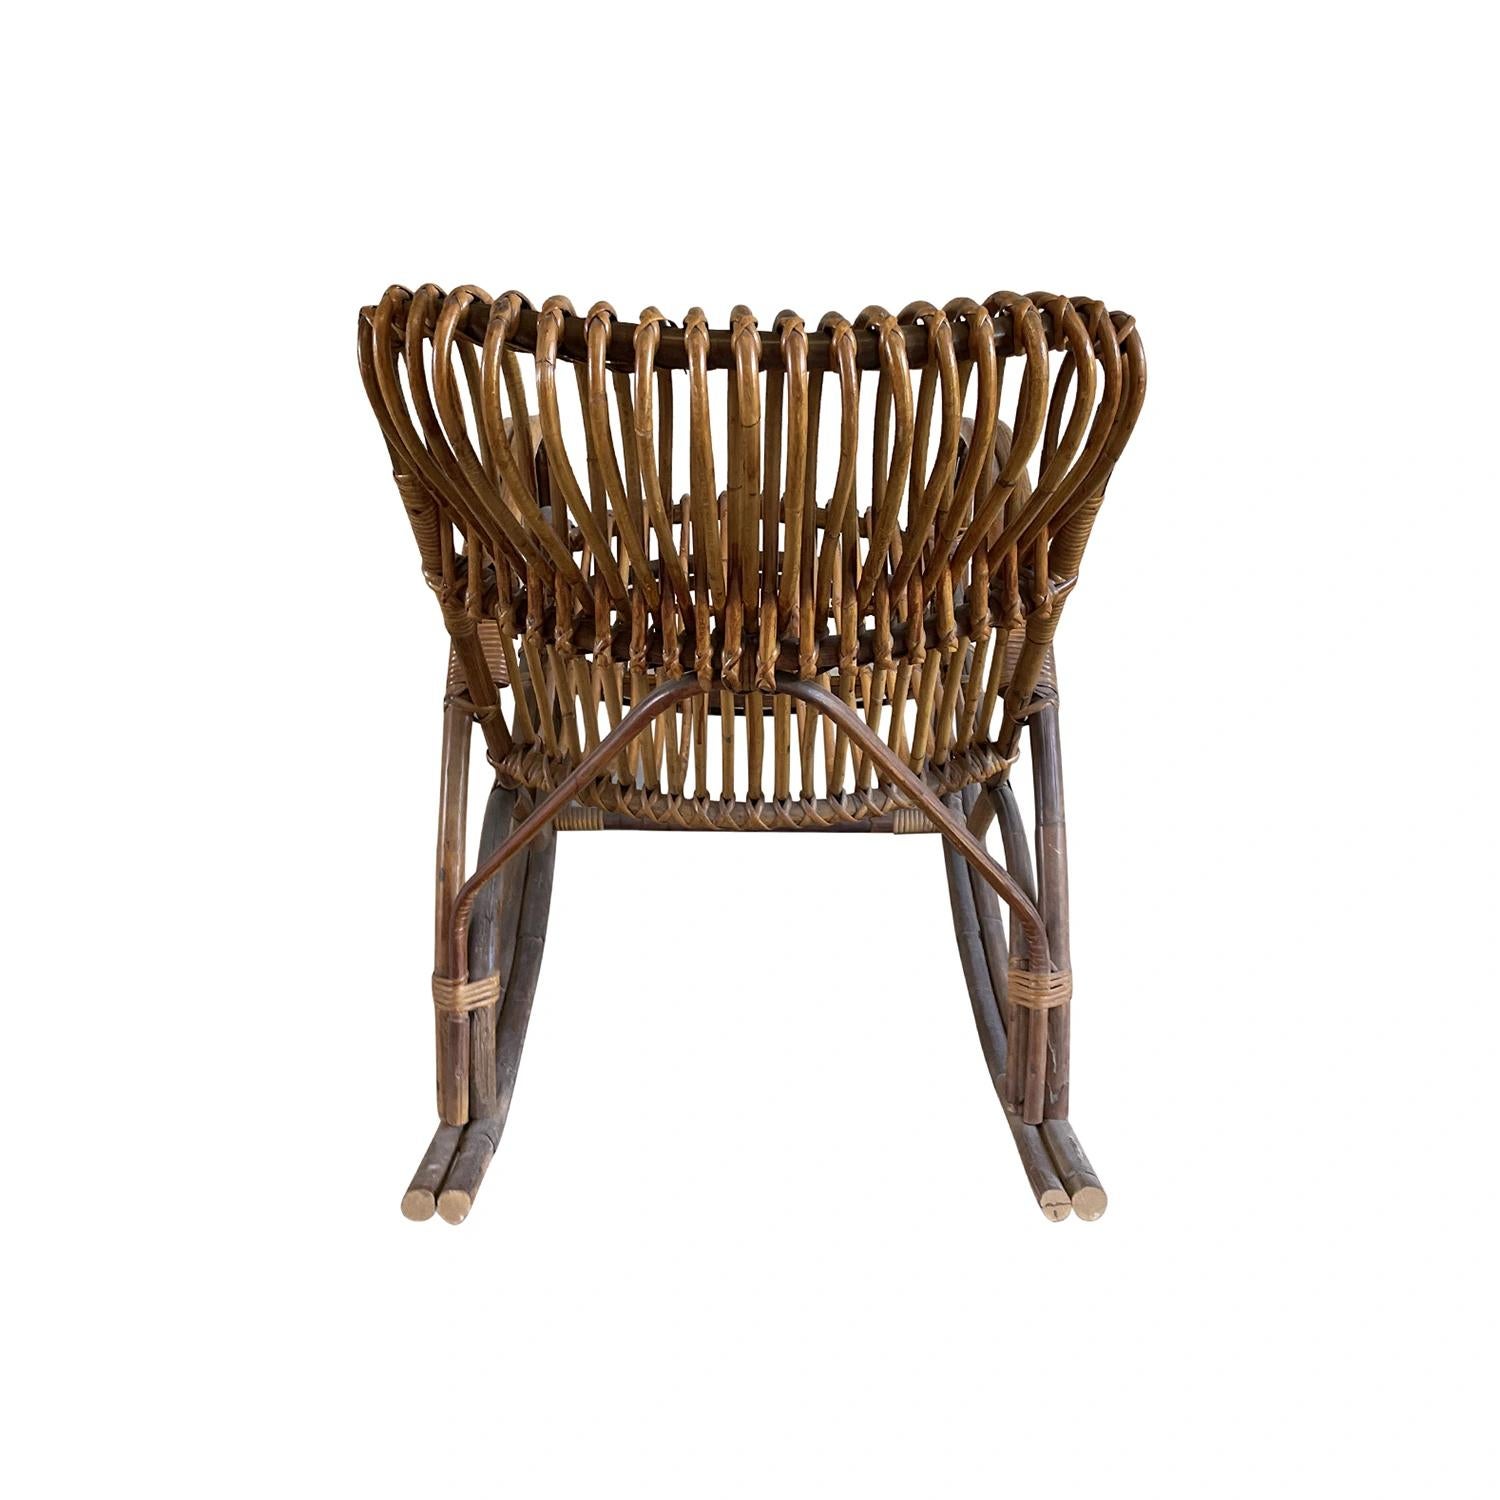 20th Century Italian Mid Century Rattan Rocking Chair - Vintage Lounge Chair In Good Condition For Sale In West Palm Beach, FL